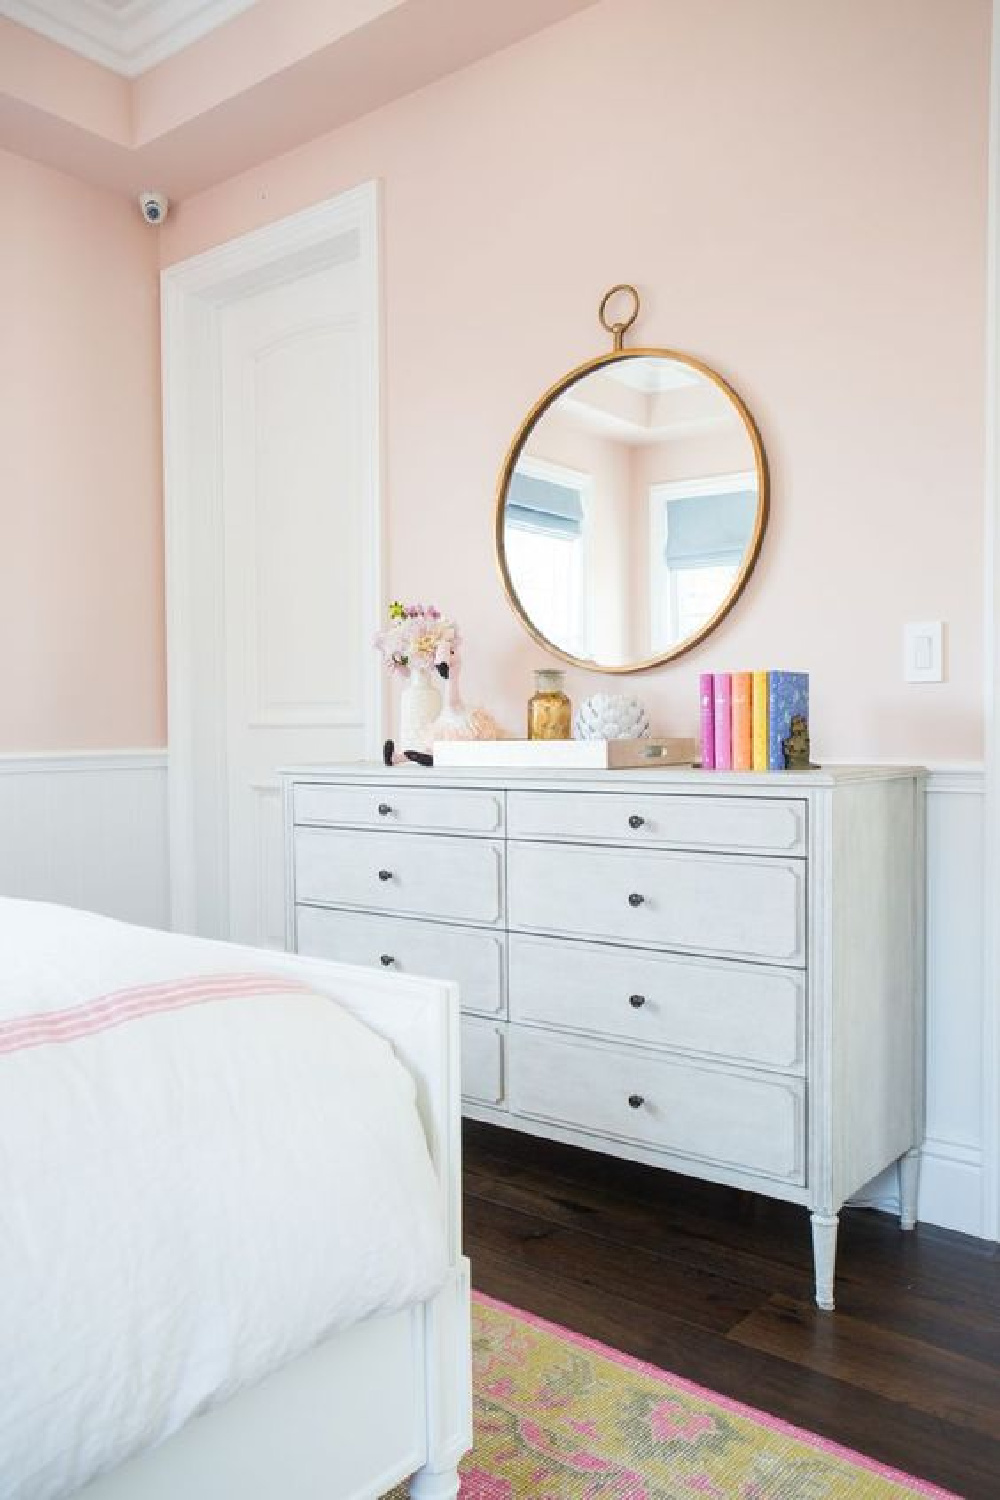 Pink Paint Colors for Girl Room: Love & Happiness by Benjamin Moore. This subtle pink fills a space with gentle good feelings. Not too bright, it whispers softly like the refrain from a favorite love song.